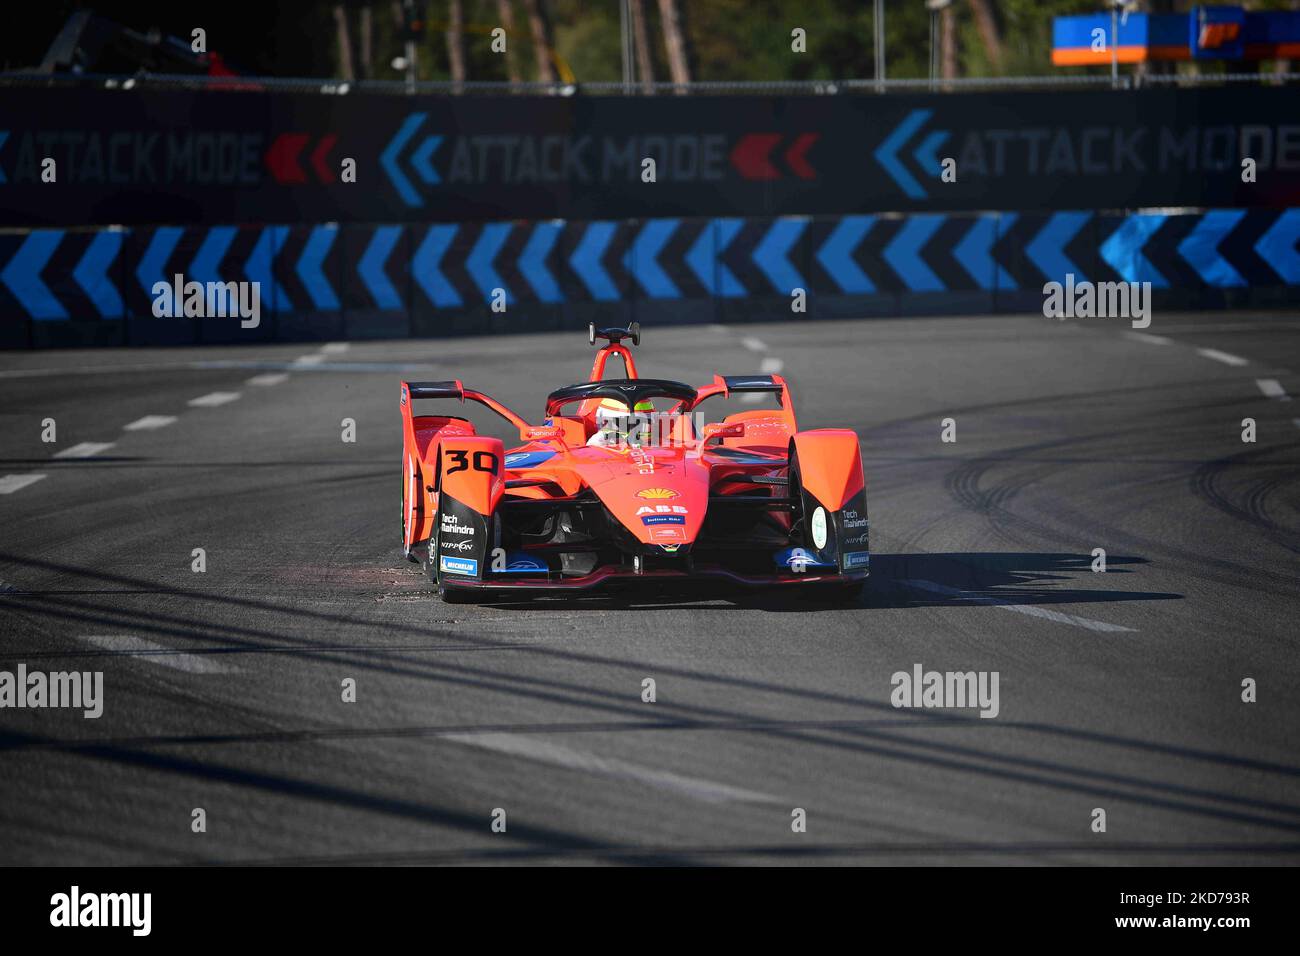 Olivier Rowland of Mahindra Racing drive his single seater during qualifying of Day 2 of Rome E-Prix, 5th round of Formula E World Championship in city circuit of Rome, EUR neighborhood Rome, 10 April 2022 (Photo by Andrea Diodato/NurPhoto) Stock Photo